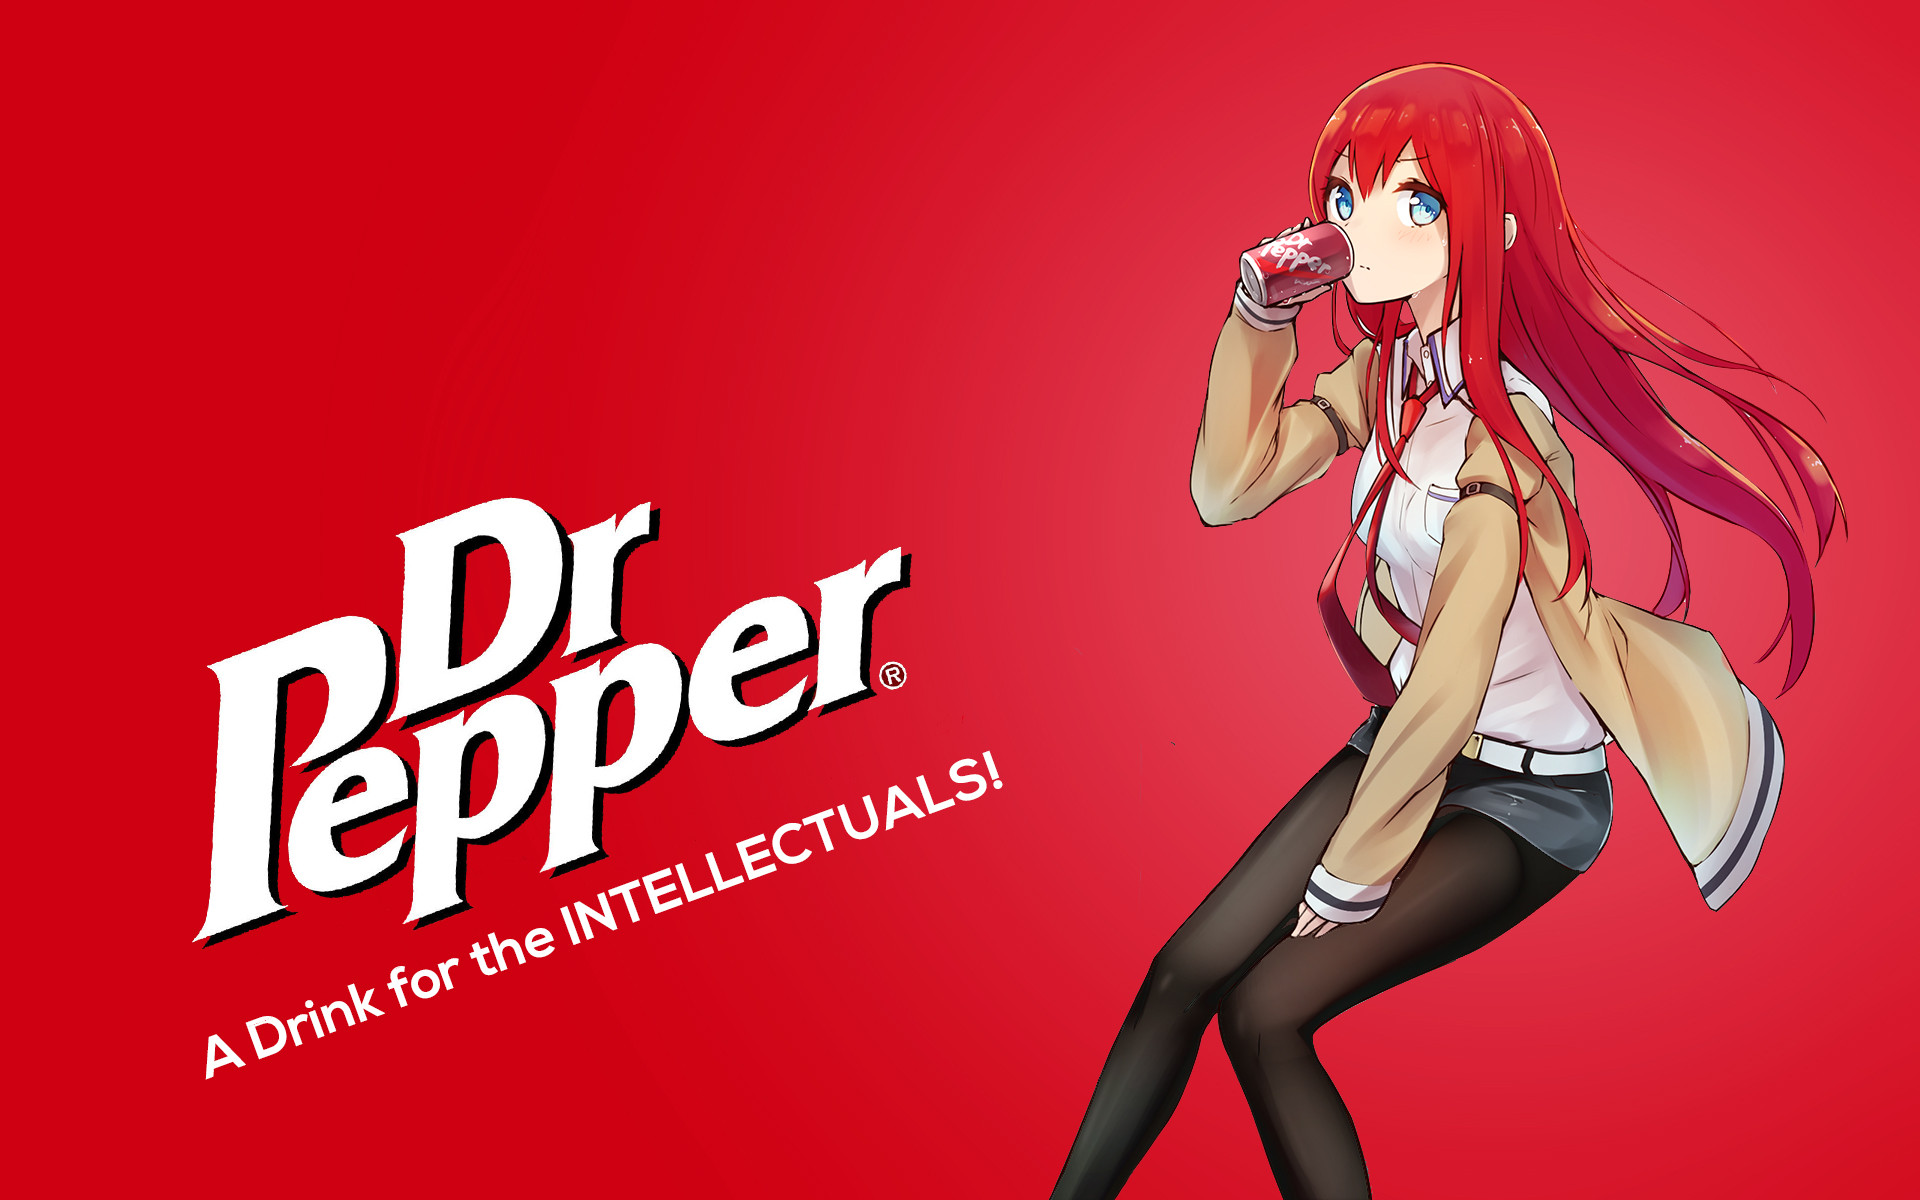 Pepper drink of intellectuals dr Libro